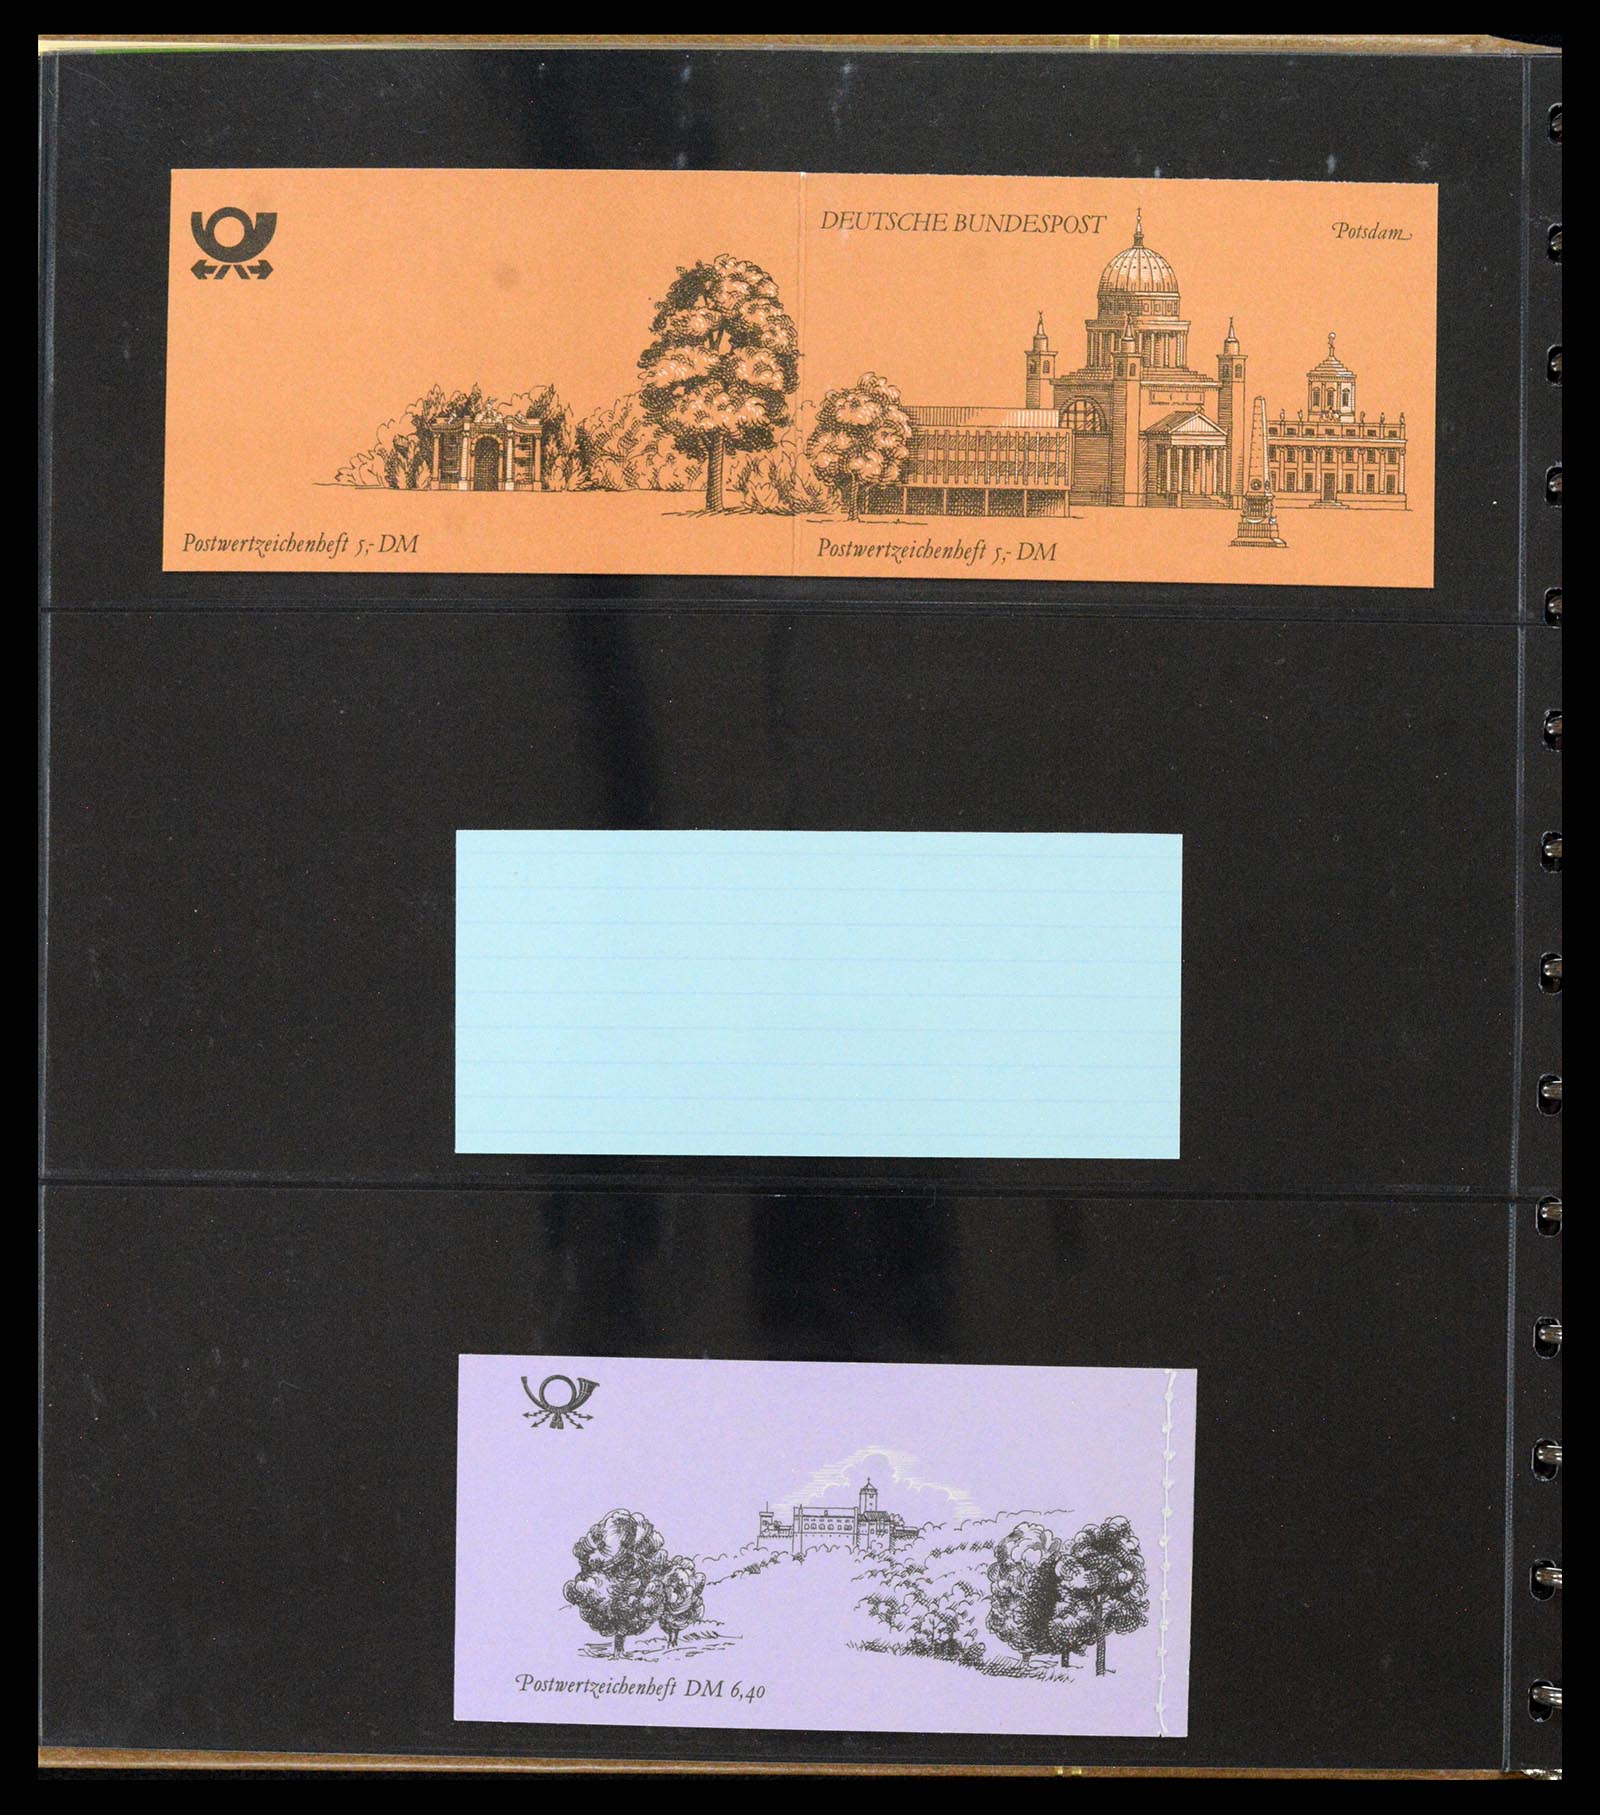 37365 059 - Stamp collection 37365 Bundespost stamp booklets 1951-2001.